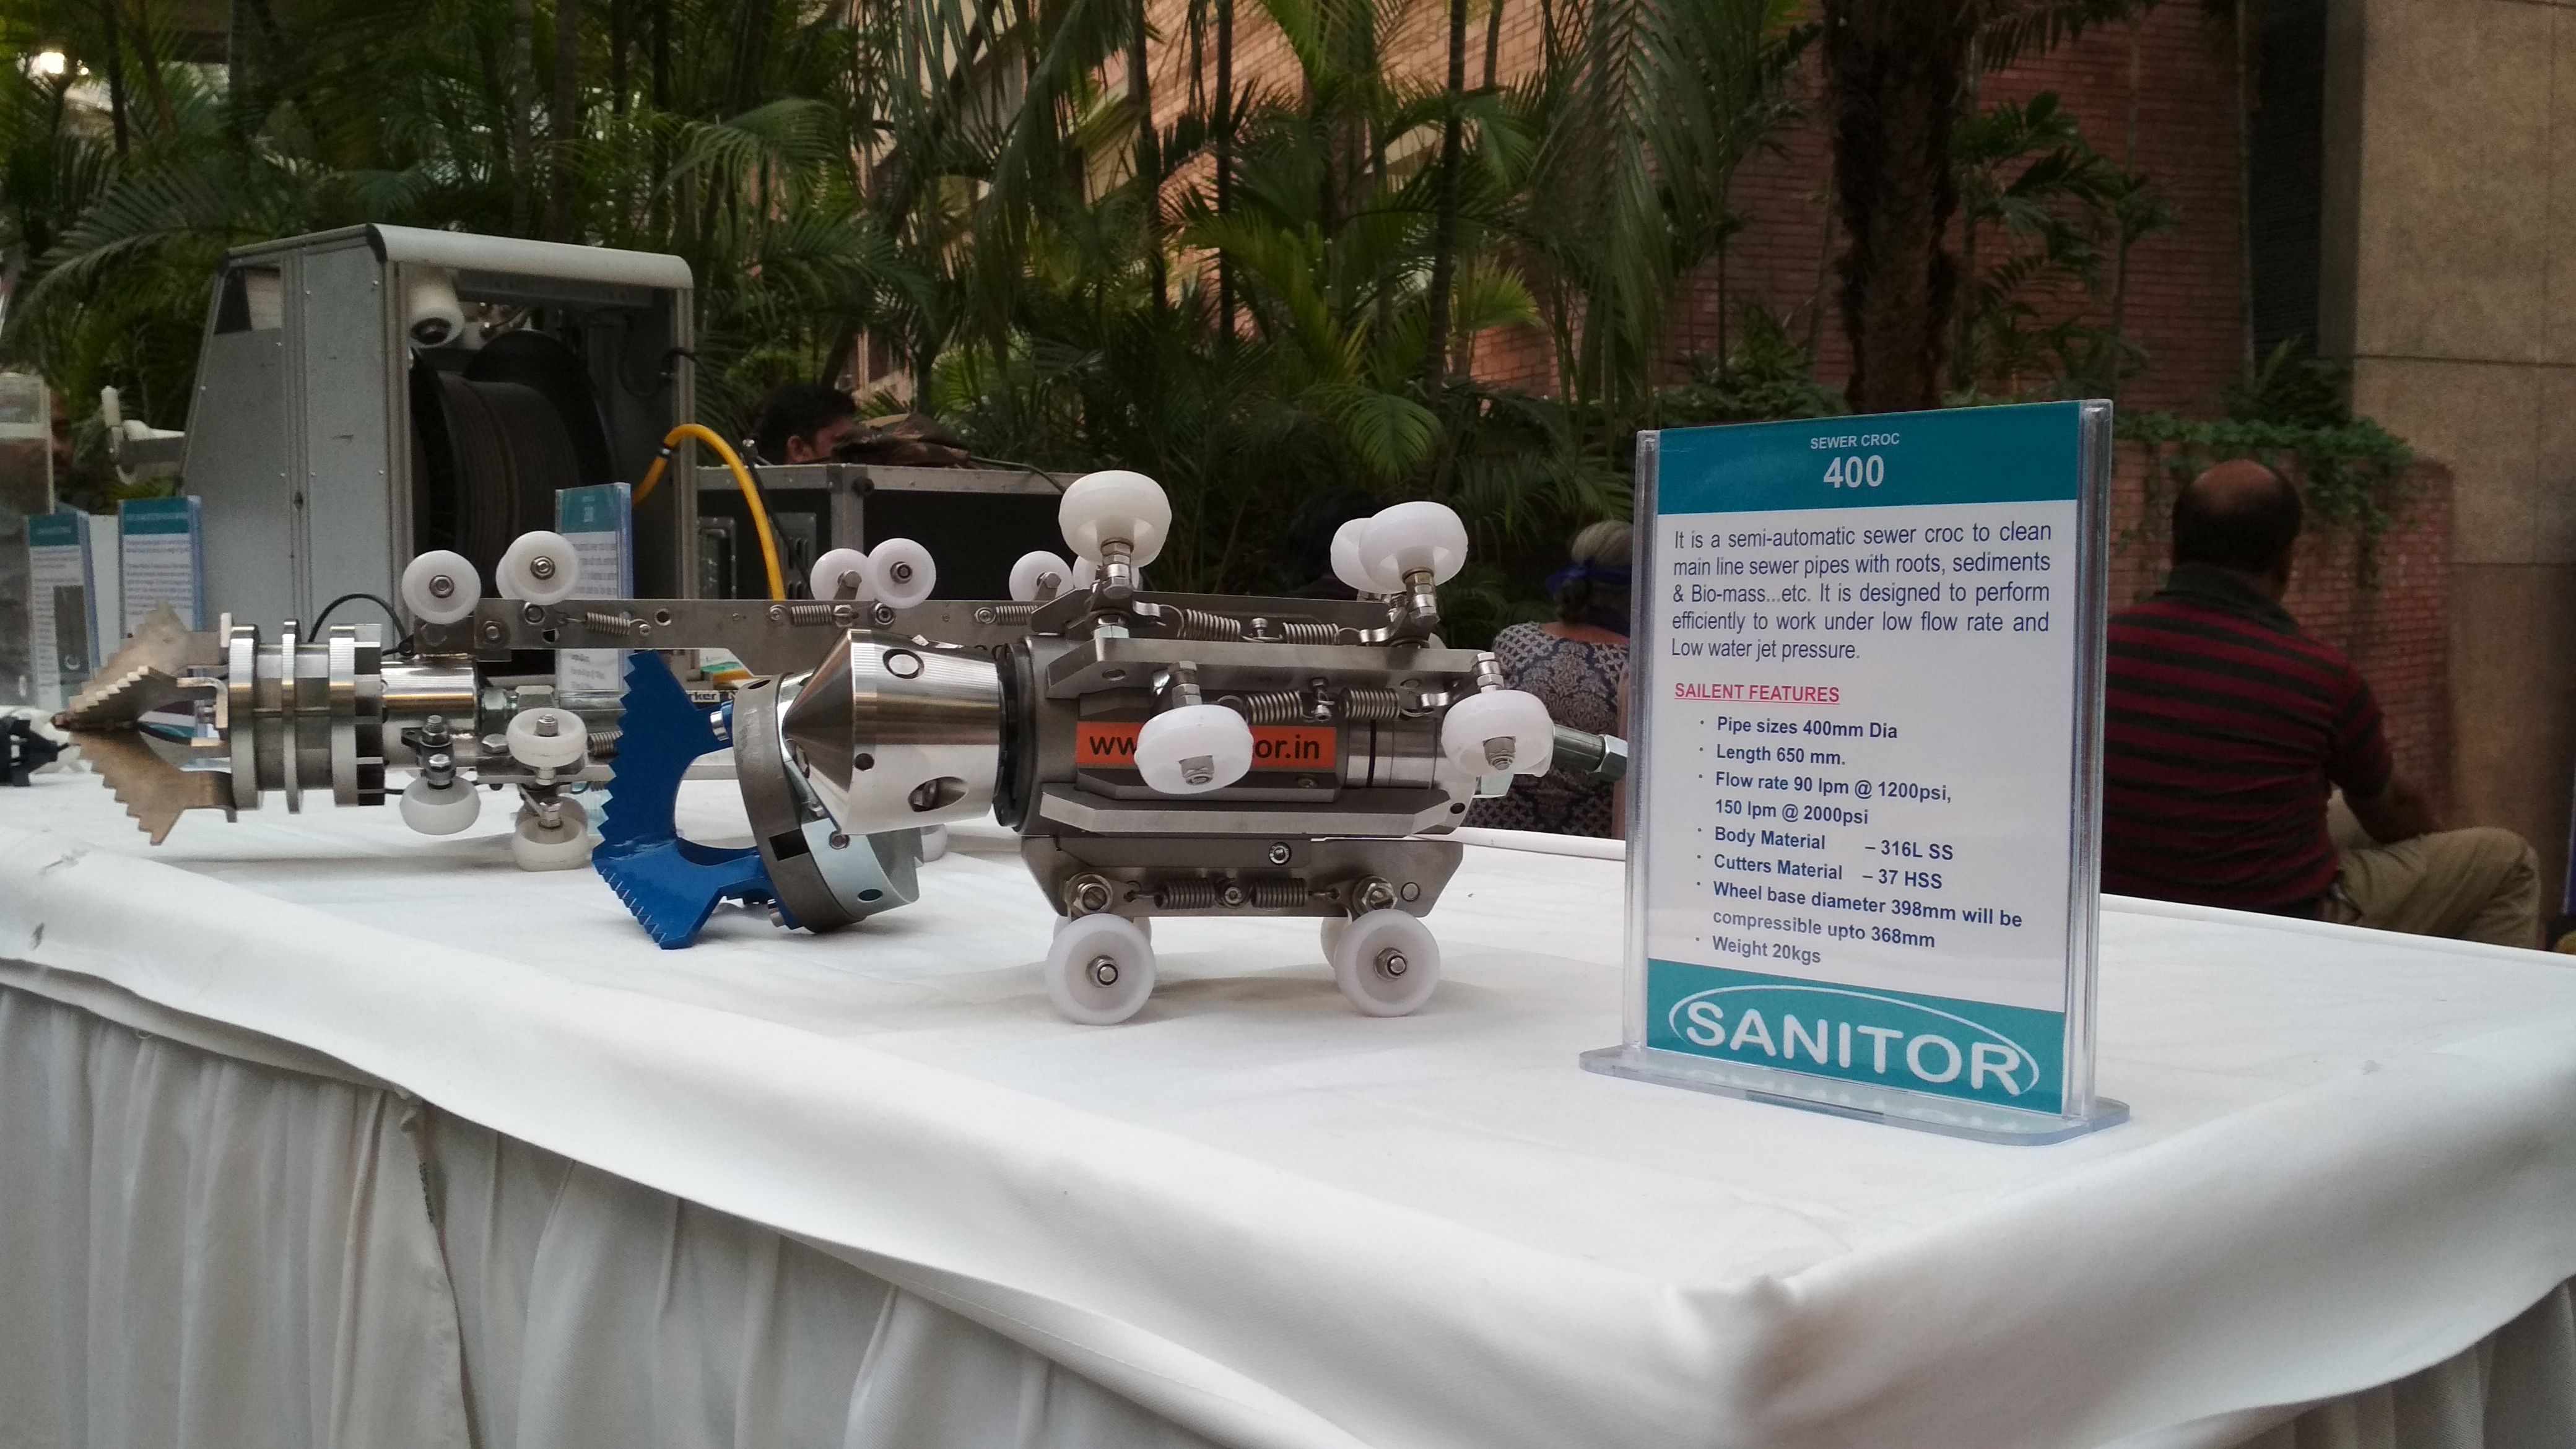 Manufactured by Bangalore-based Sanitor and Ajantha Technologies, this semi-automatic machine can be attached to a water jetting machine and lowered inside a manhole. It has a drill-like head that rotates due to pressure generated by water coming out of the vents. It costs between Rs 1.8 lakh and Rs 2.7 lakh depending on its size. The gas monitor helps detect any harmful gas inside the sewage tanks. It costs Rs 20,000 and can raise an alarm when the levels of carbon dioxide, hydrogen sulphide and methane reach dangerous levels. A venting system is attached to a valve which drains out harmful gases. (Image: India Water Portal)